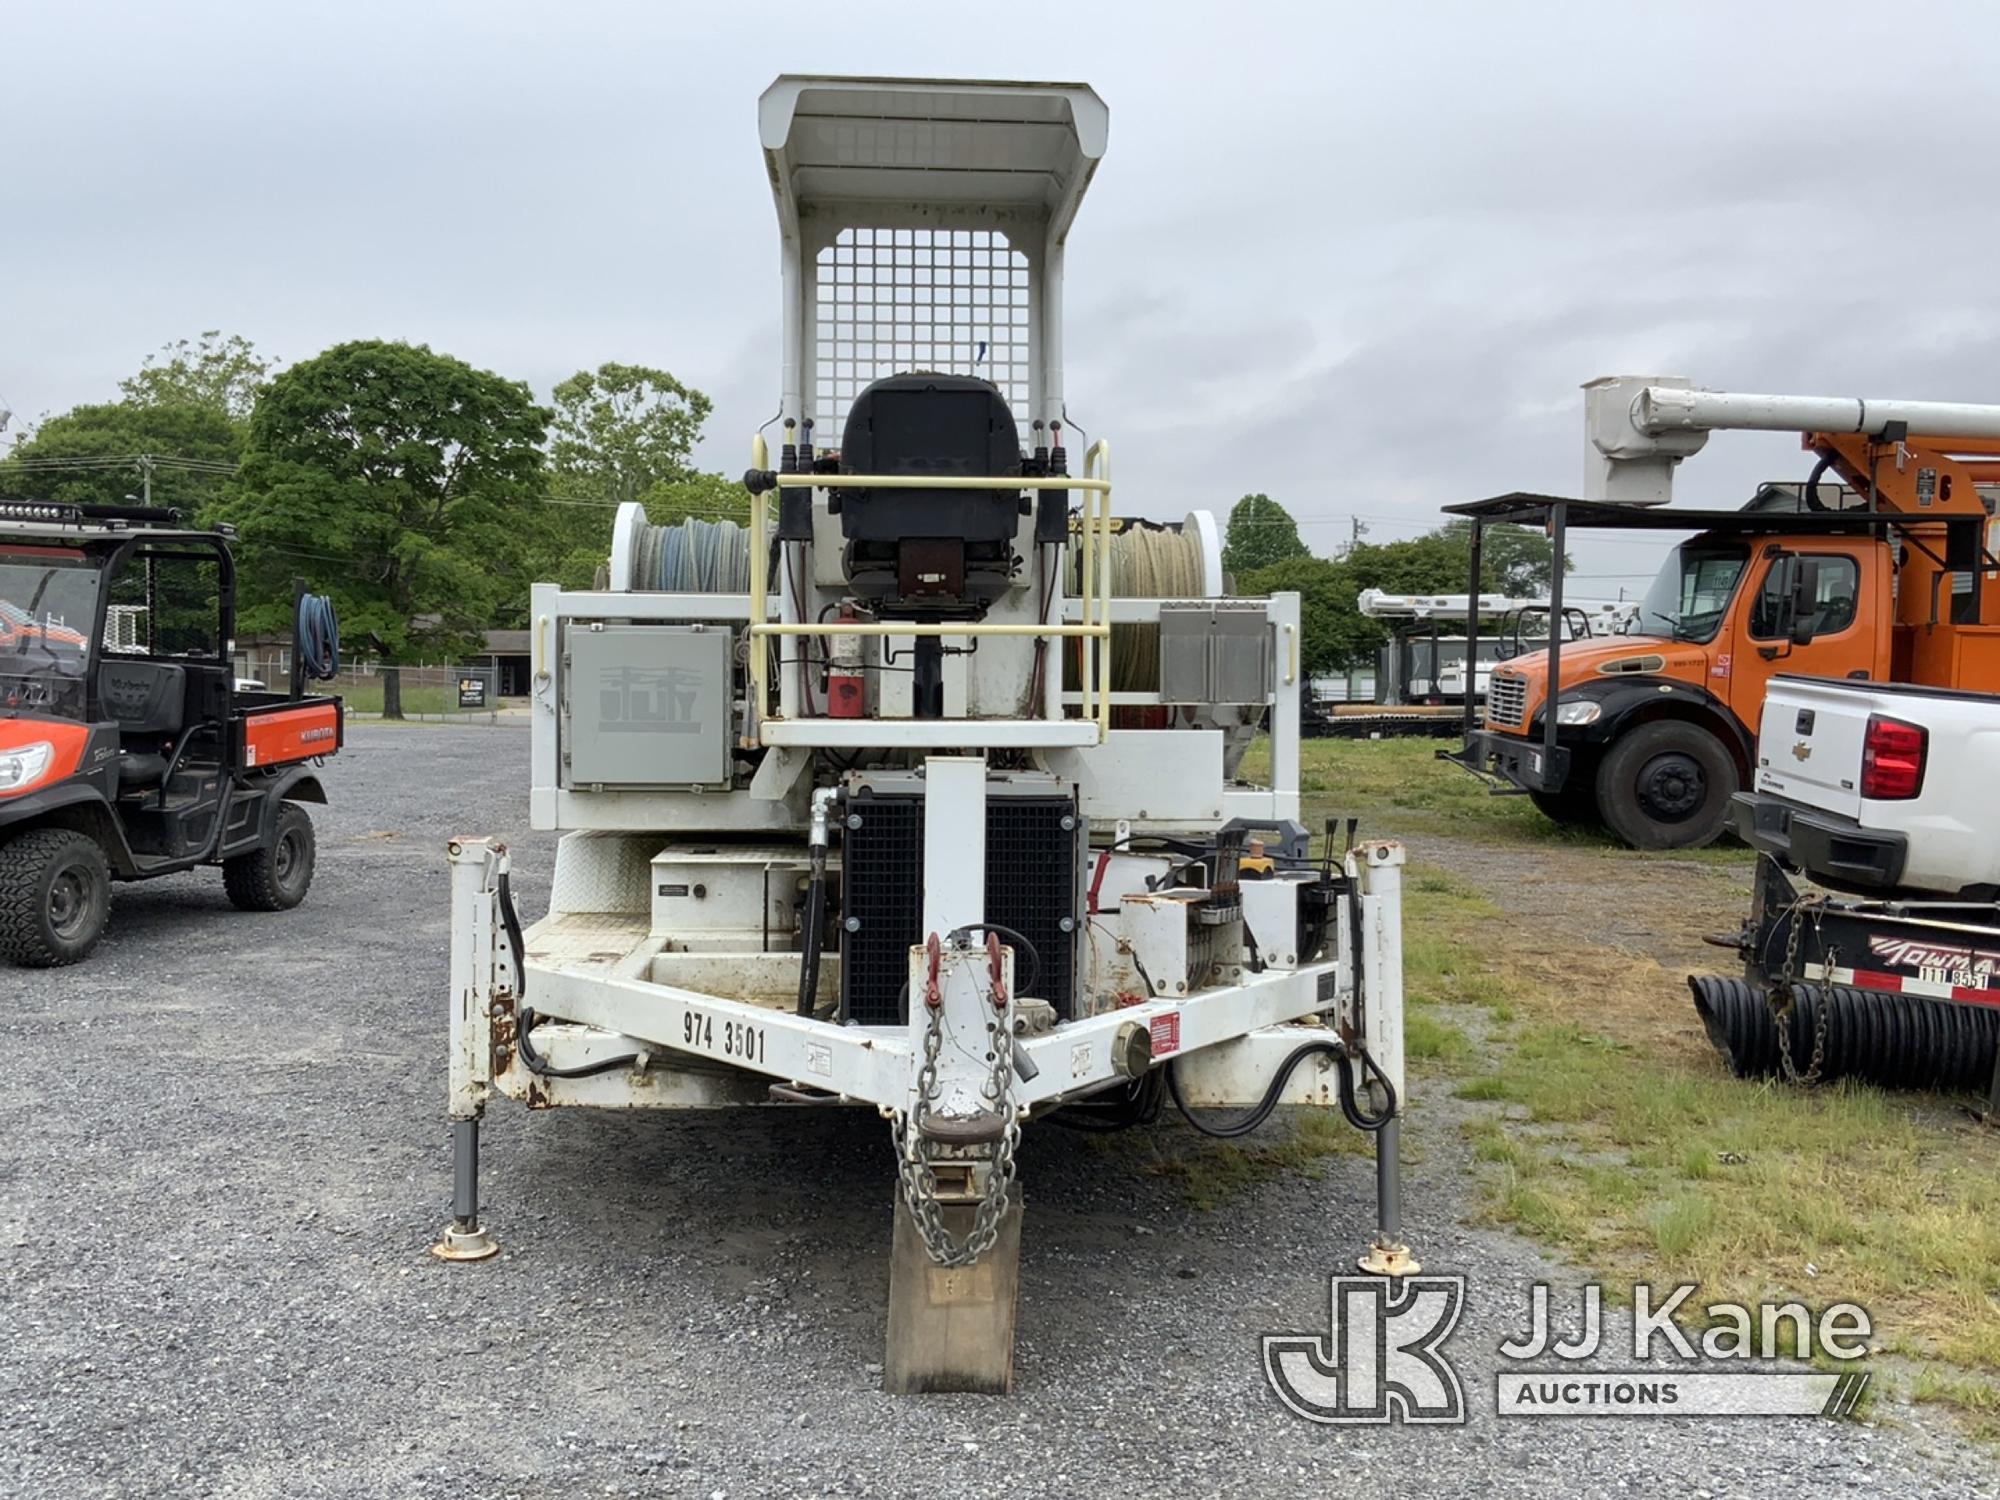 (Shelby, NC) 2013 Sherman Reilly HPLW2004A 4-Drum Pilot Line Winder Runs) (Does Not Move, Condition